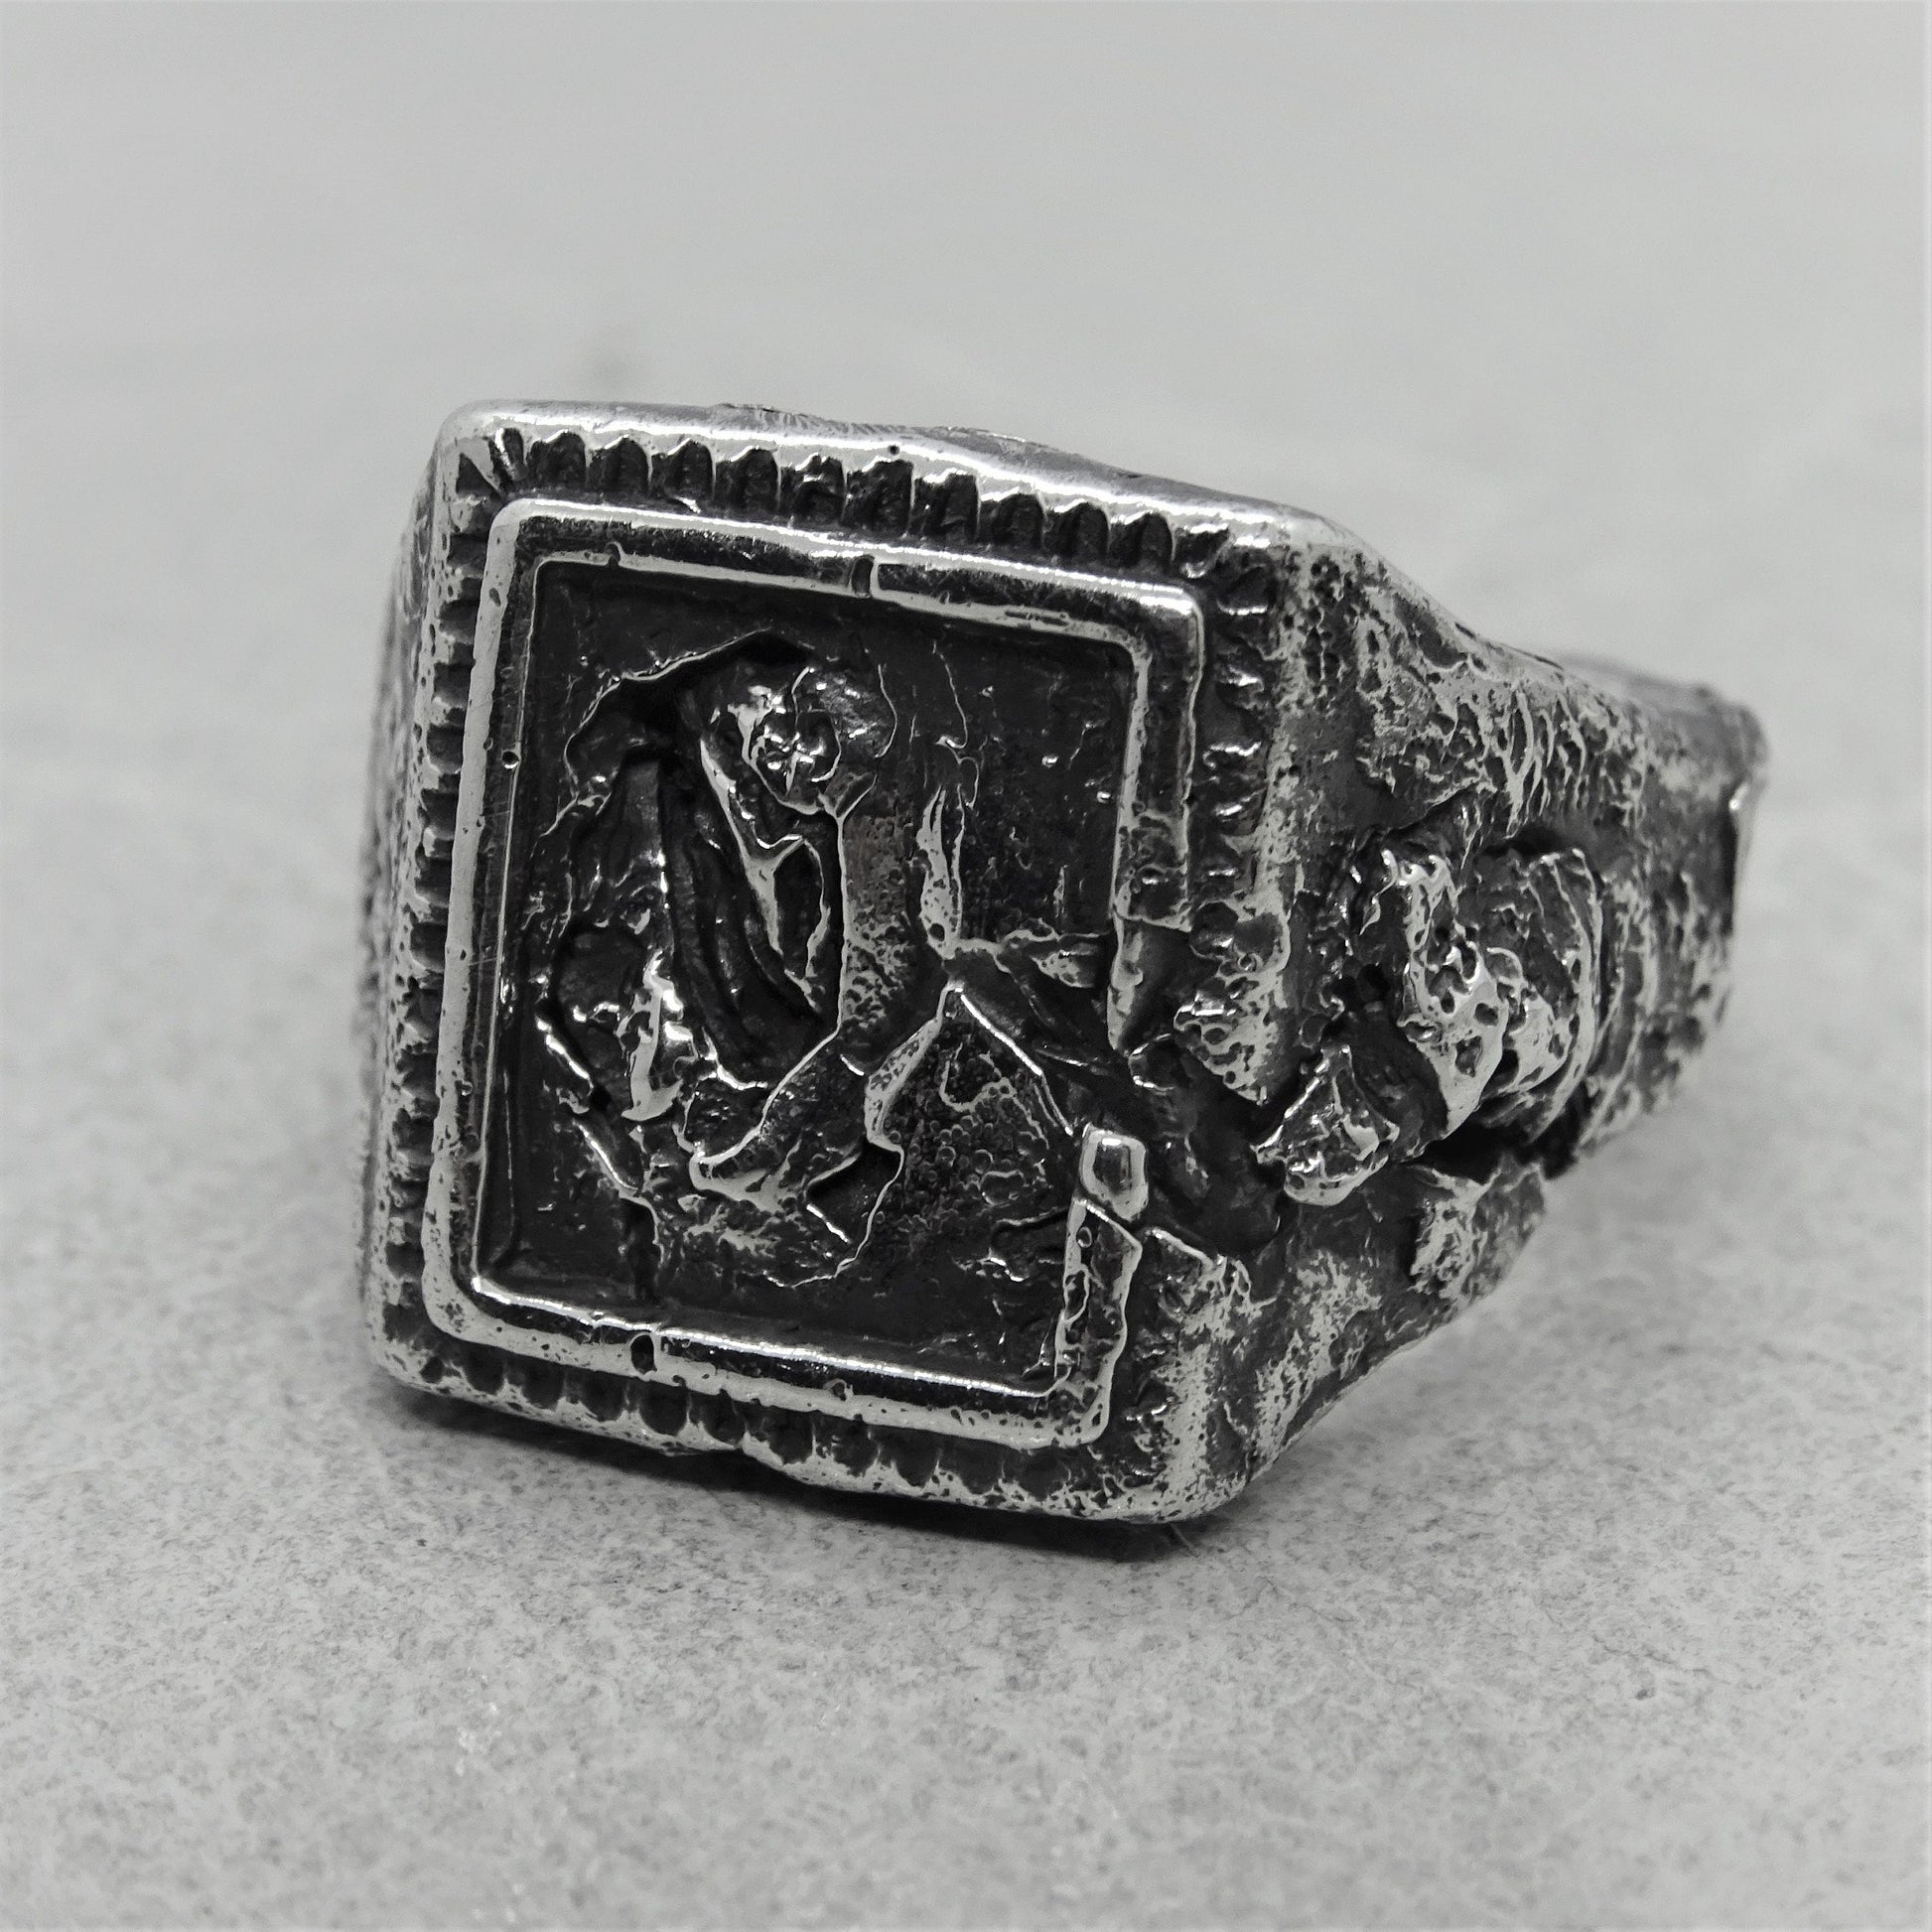 Svanetty ring - an unusual signet ring of a square shape with destroyed ethnic patterns Signet rings Project50g 